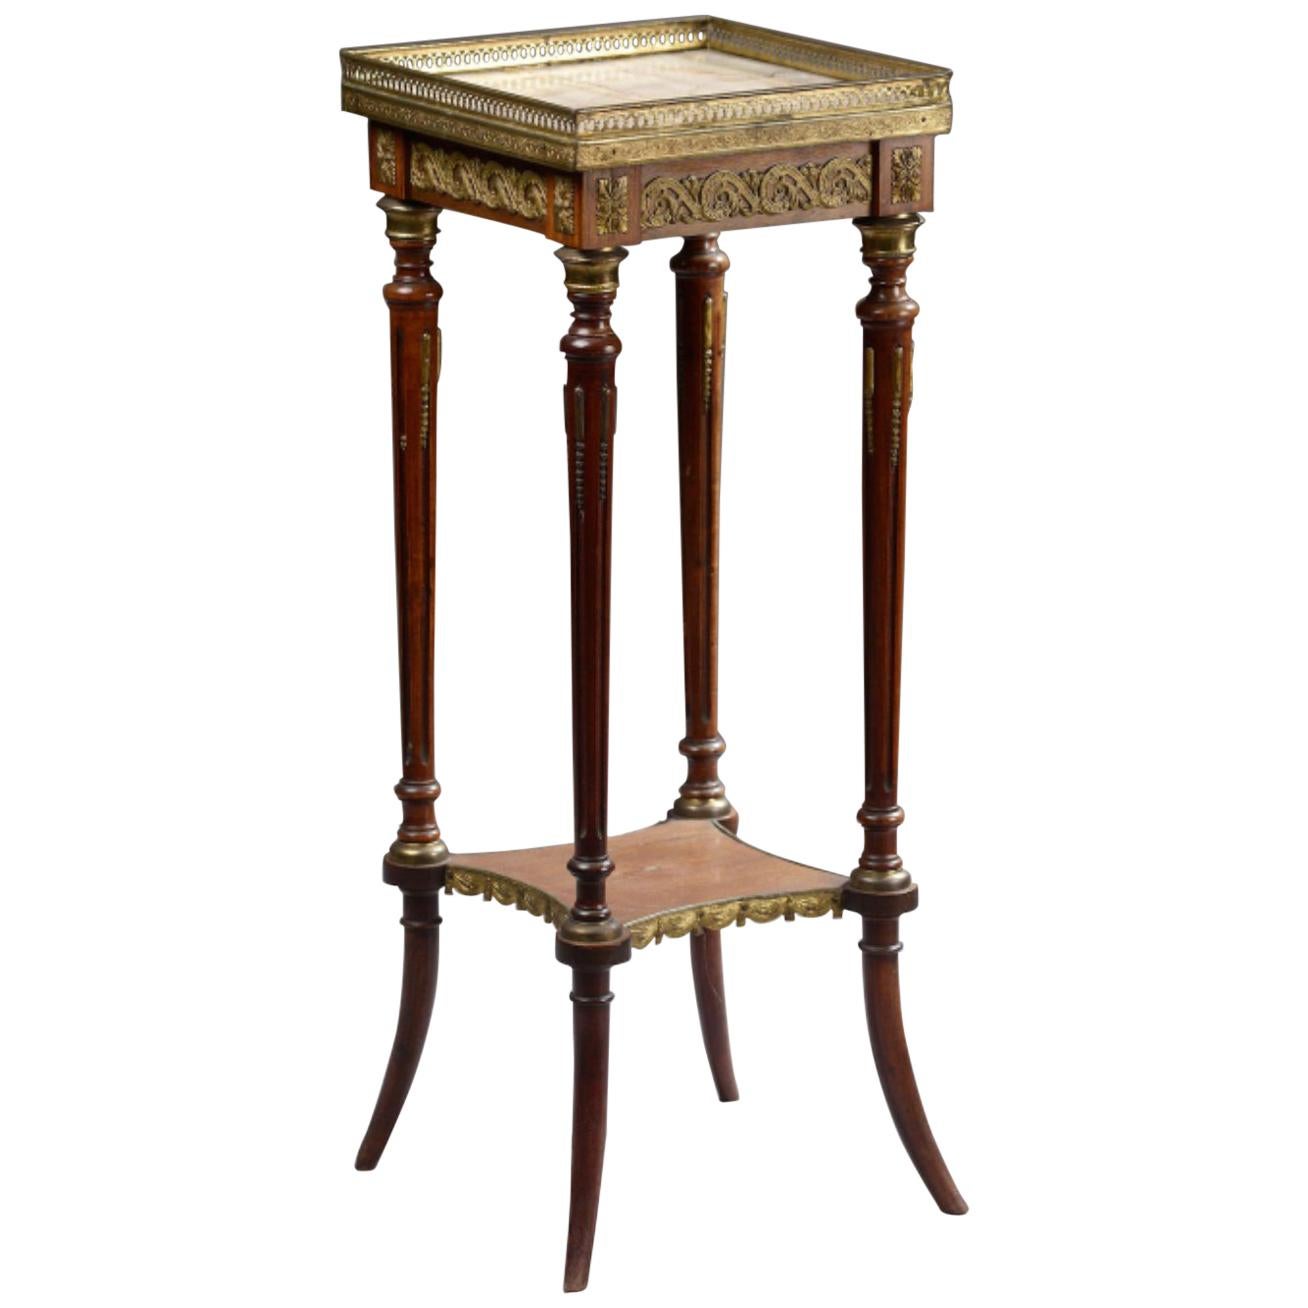 Late 19th Century French Mahogany Side Table with Onyx Top Plate